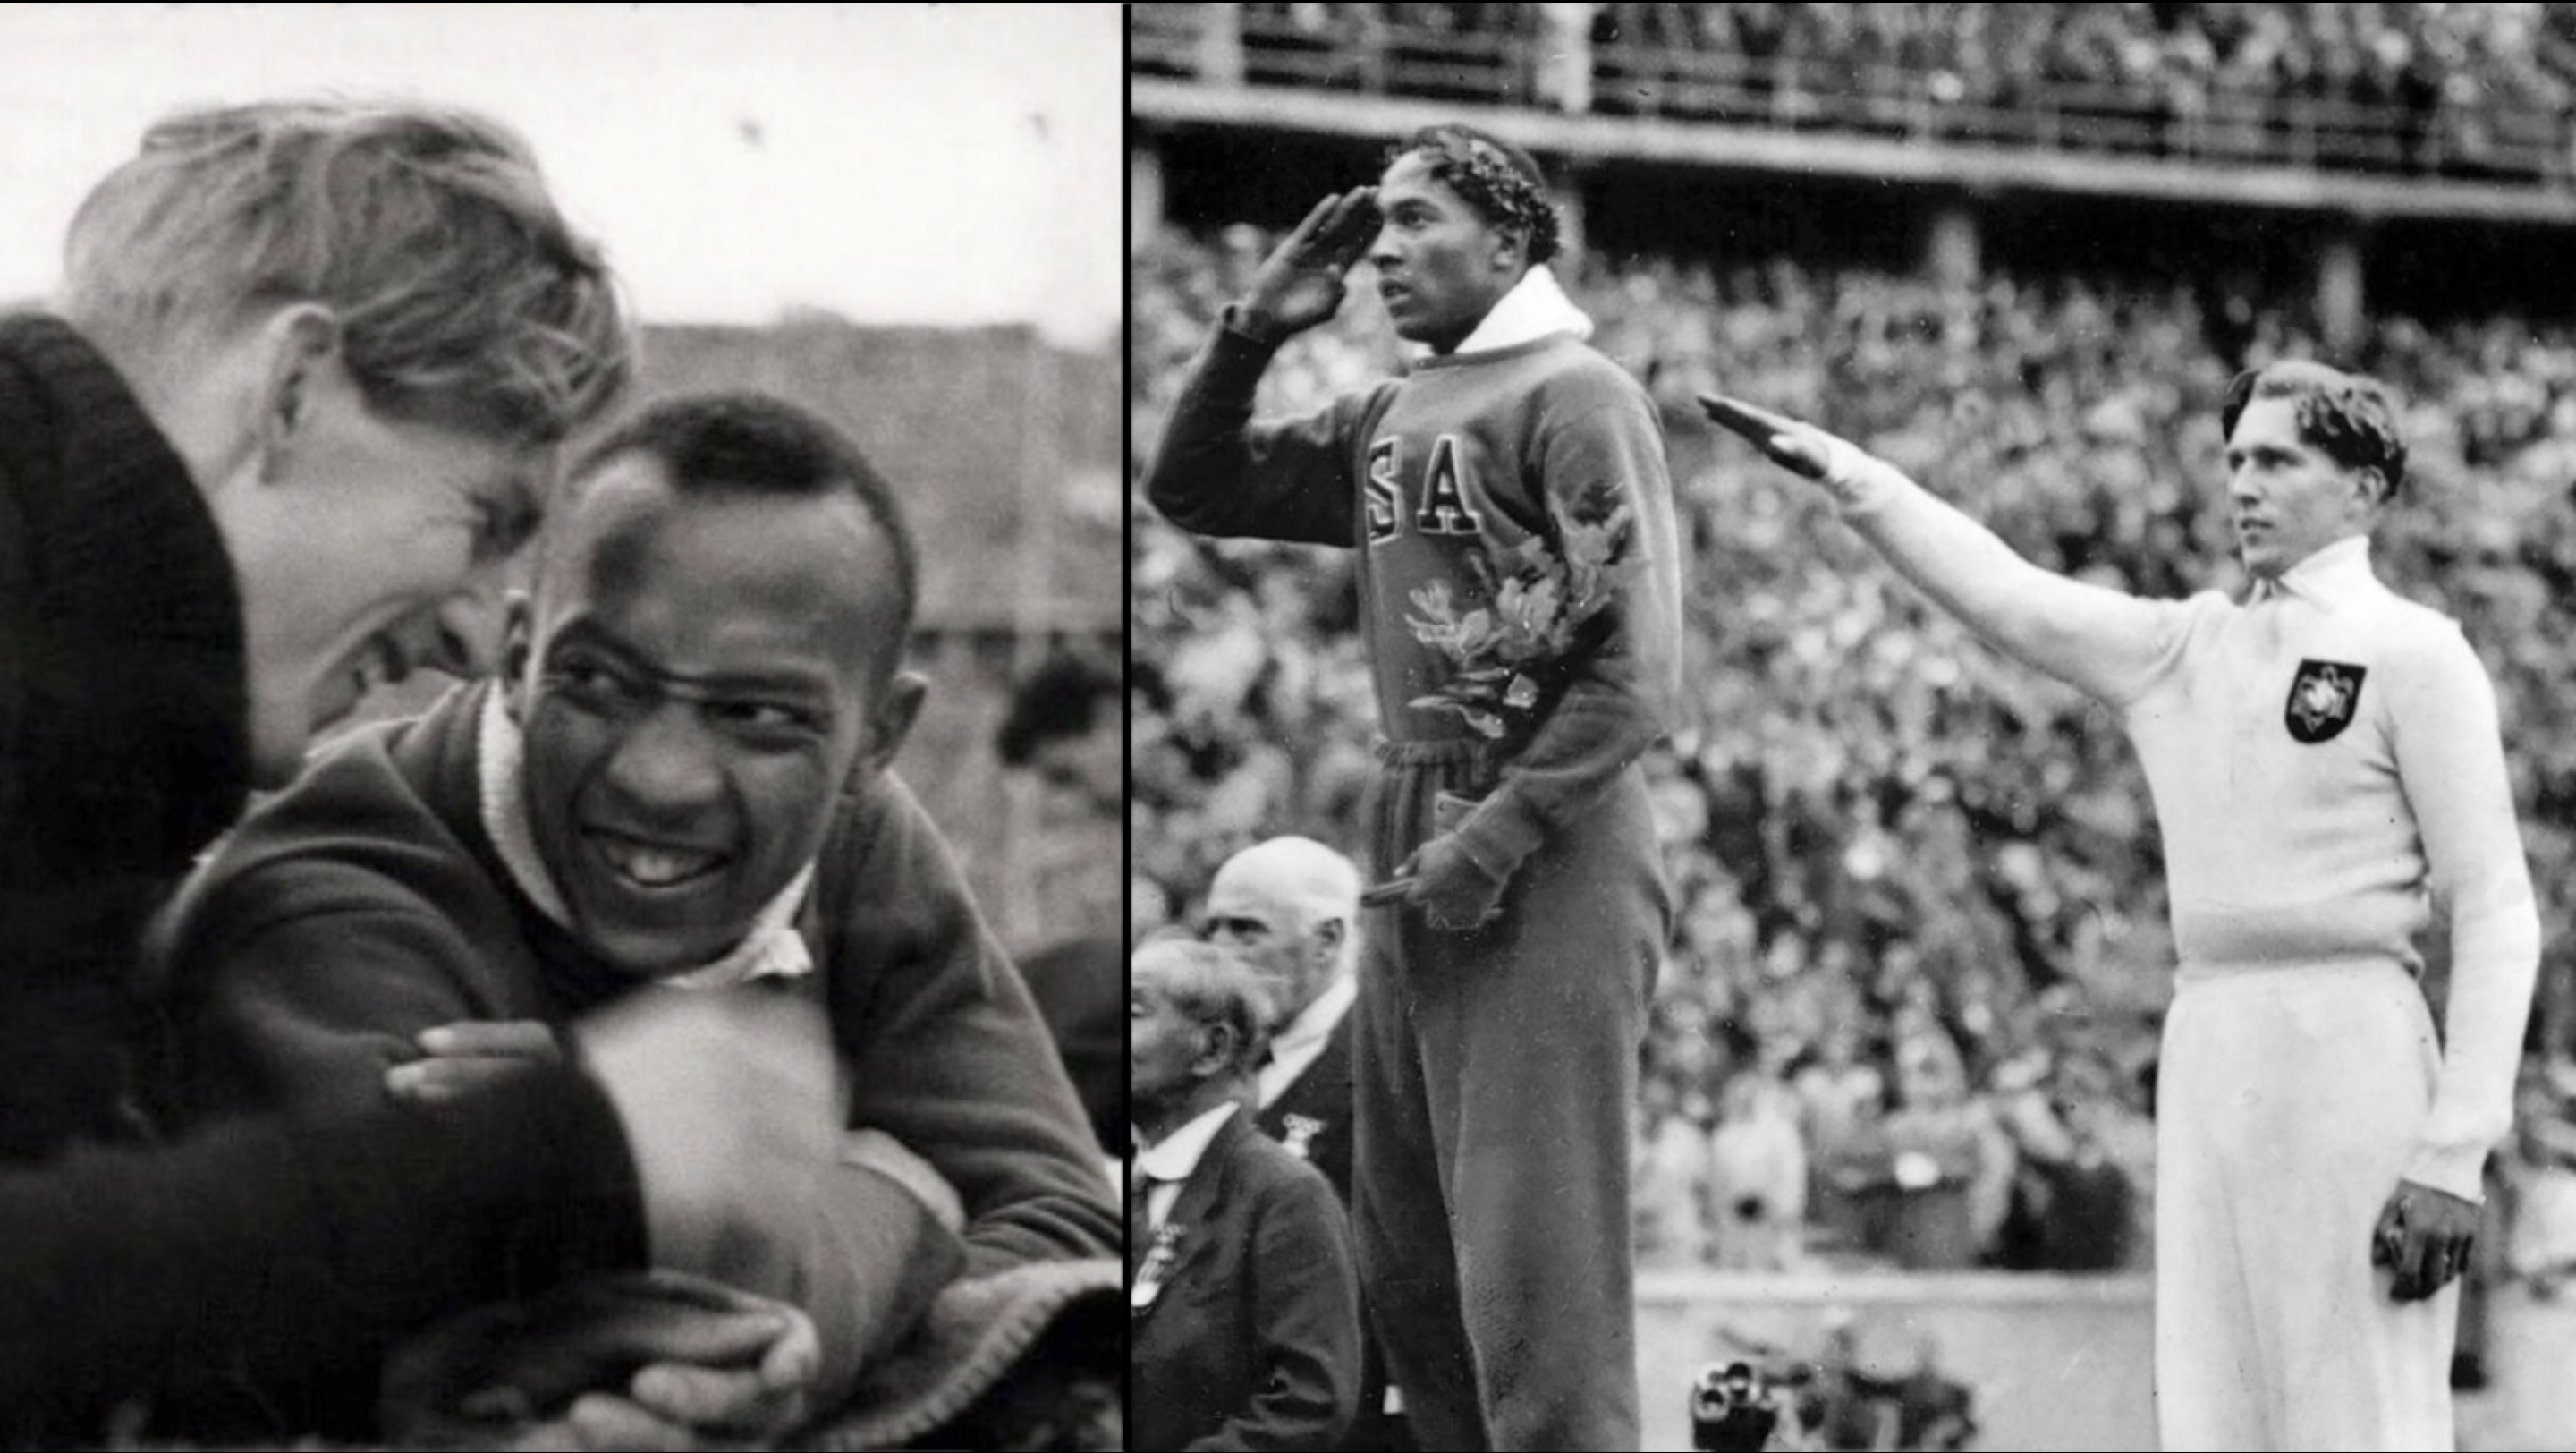 A Black Man (Jesse Owens) and a Nazi: A Friendship Forged in Competition & Courage